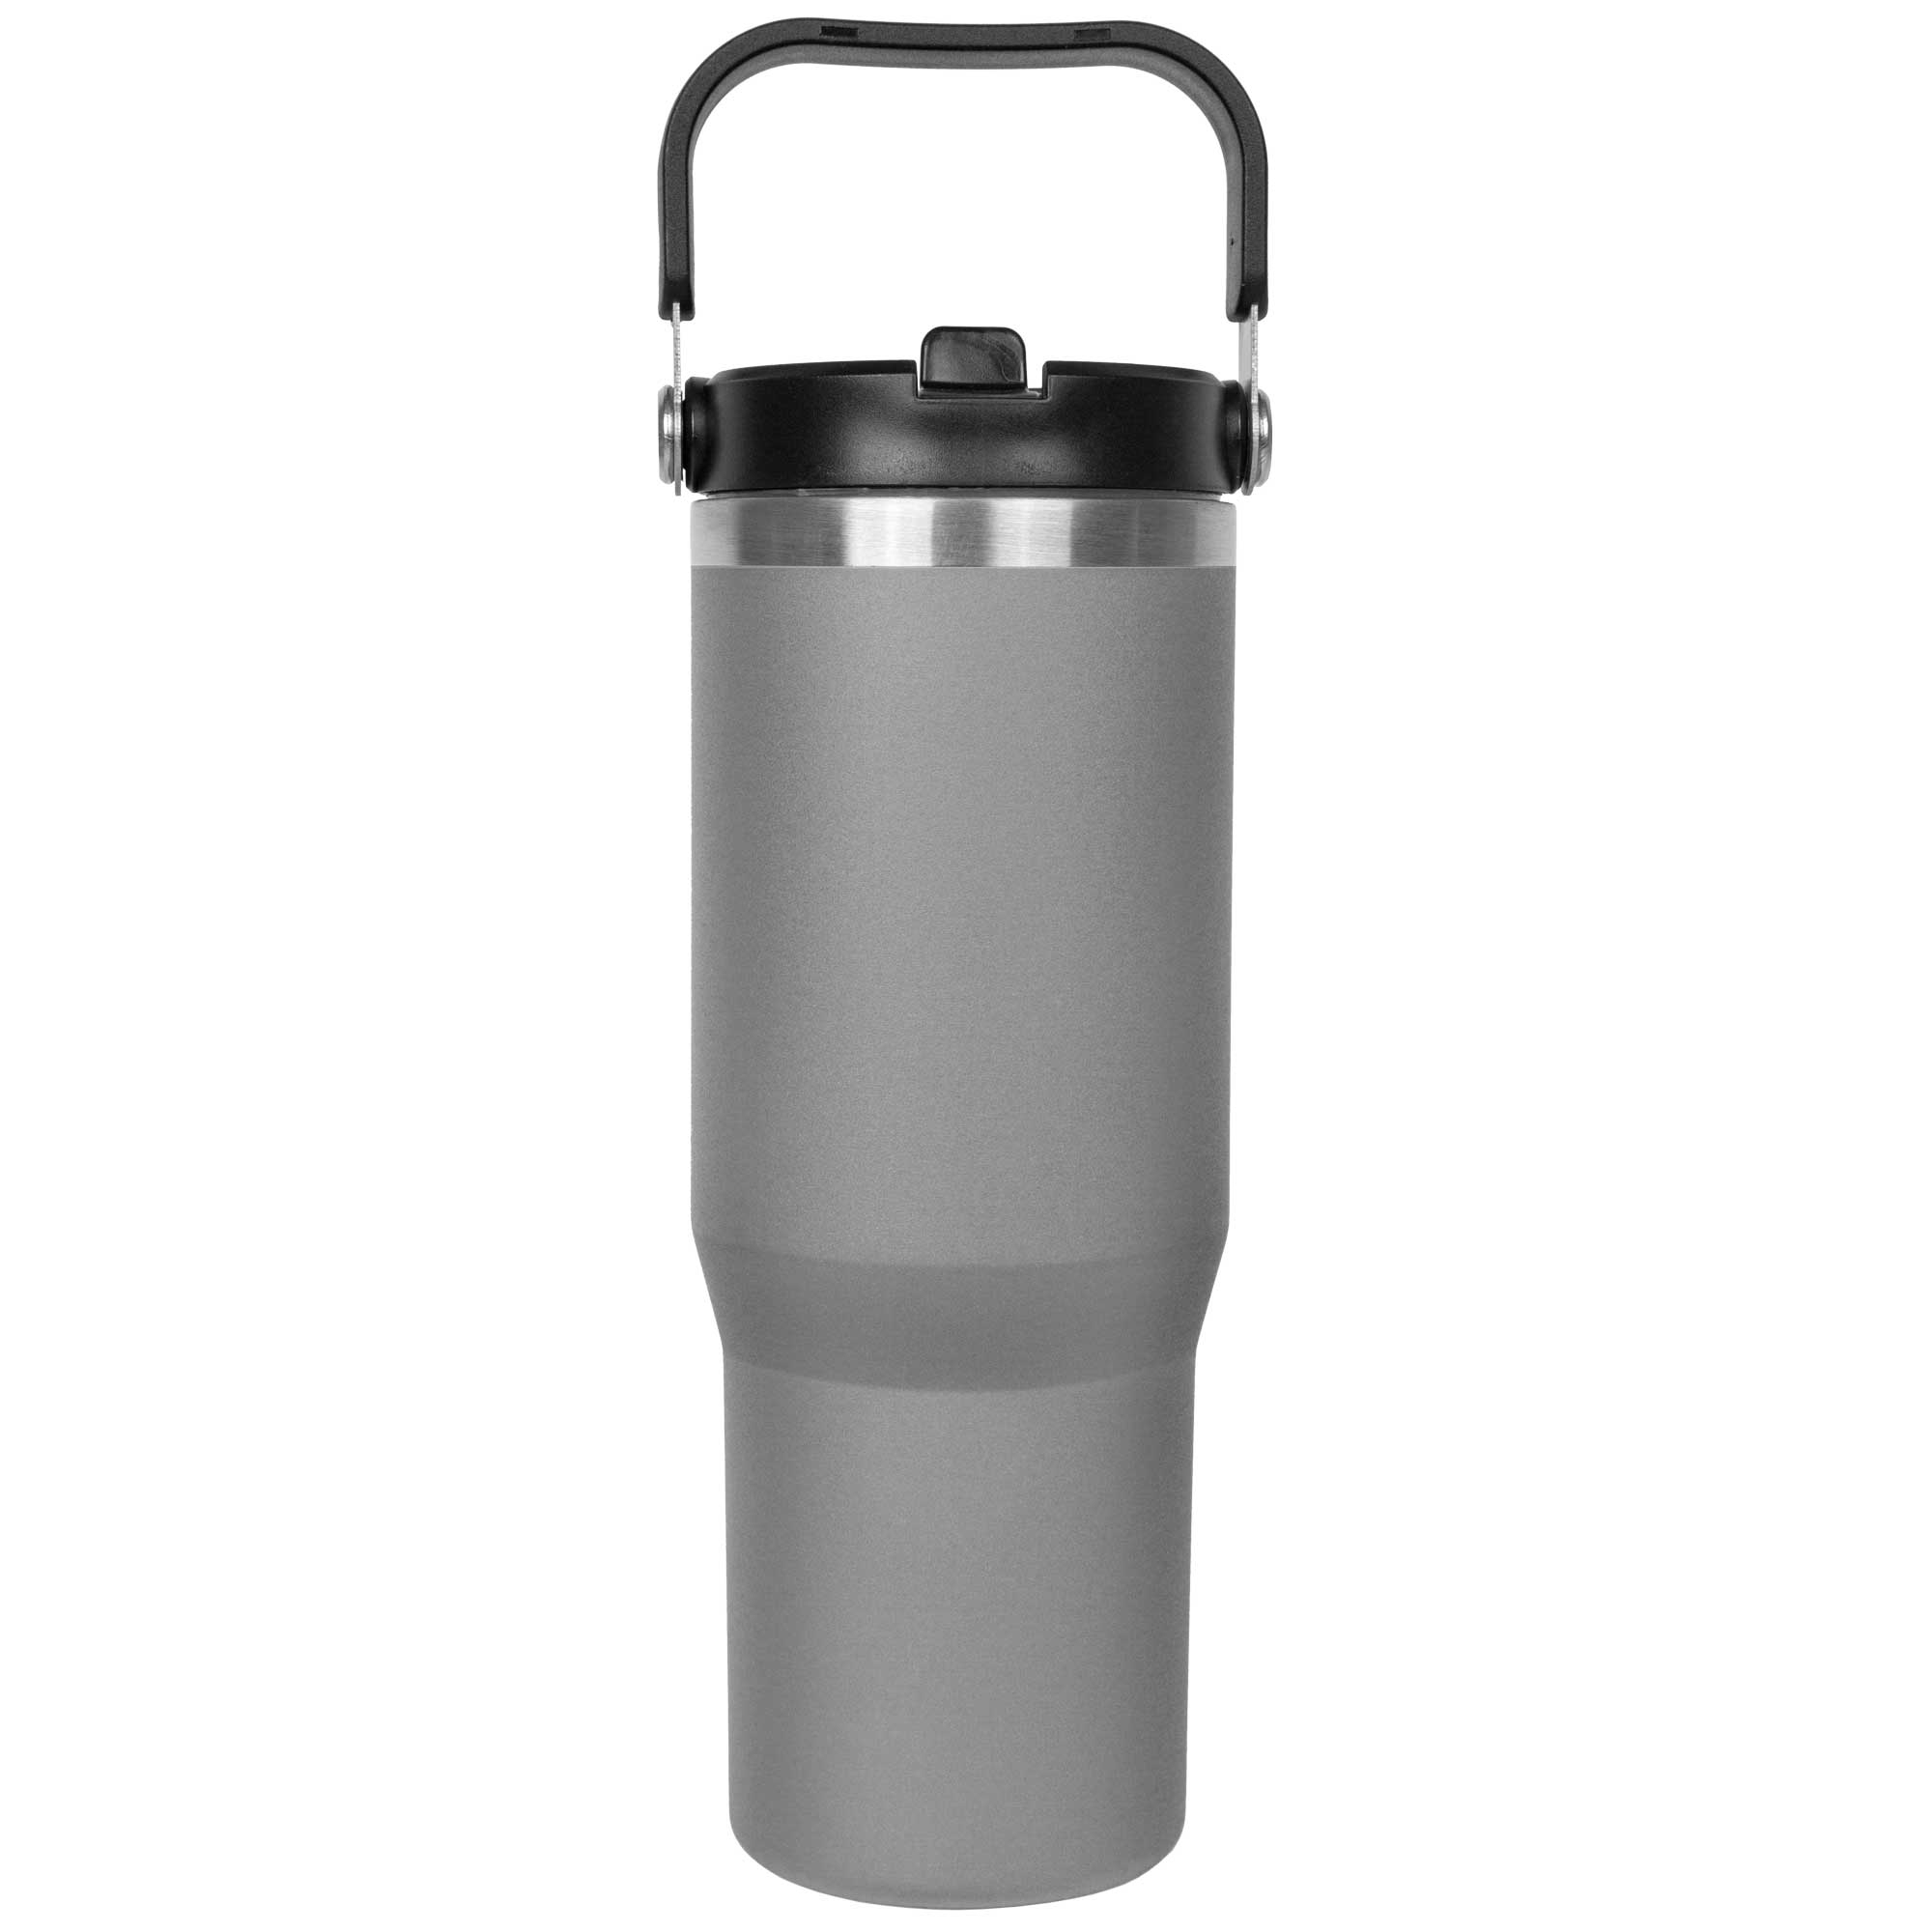 https://waterbottles.com/media/catalog/product/s/8/s820-07-front-blank_2nd.jpg